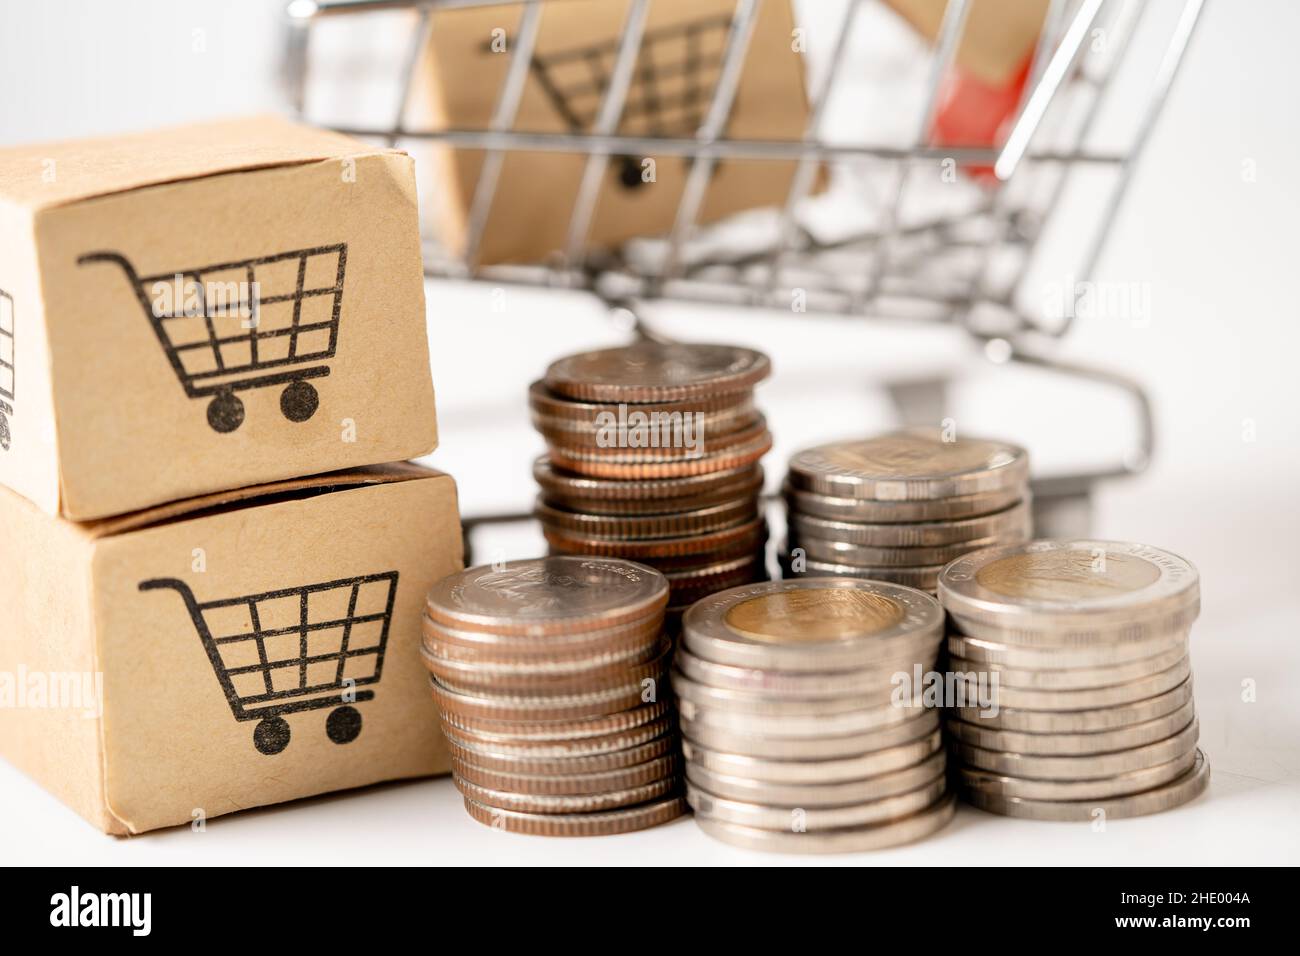 Shopping cart logo on box with coins. Banking Account, Investment Analytic research data economy, trading, Business import export online company conce Stock Photo